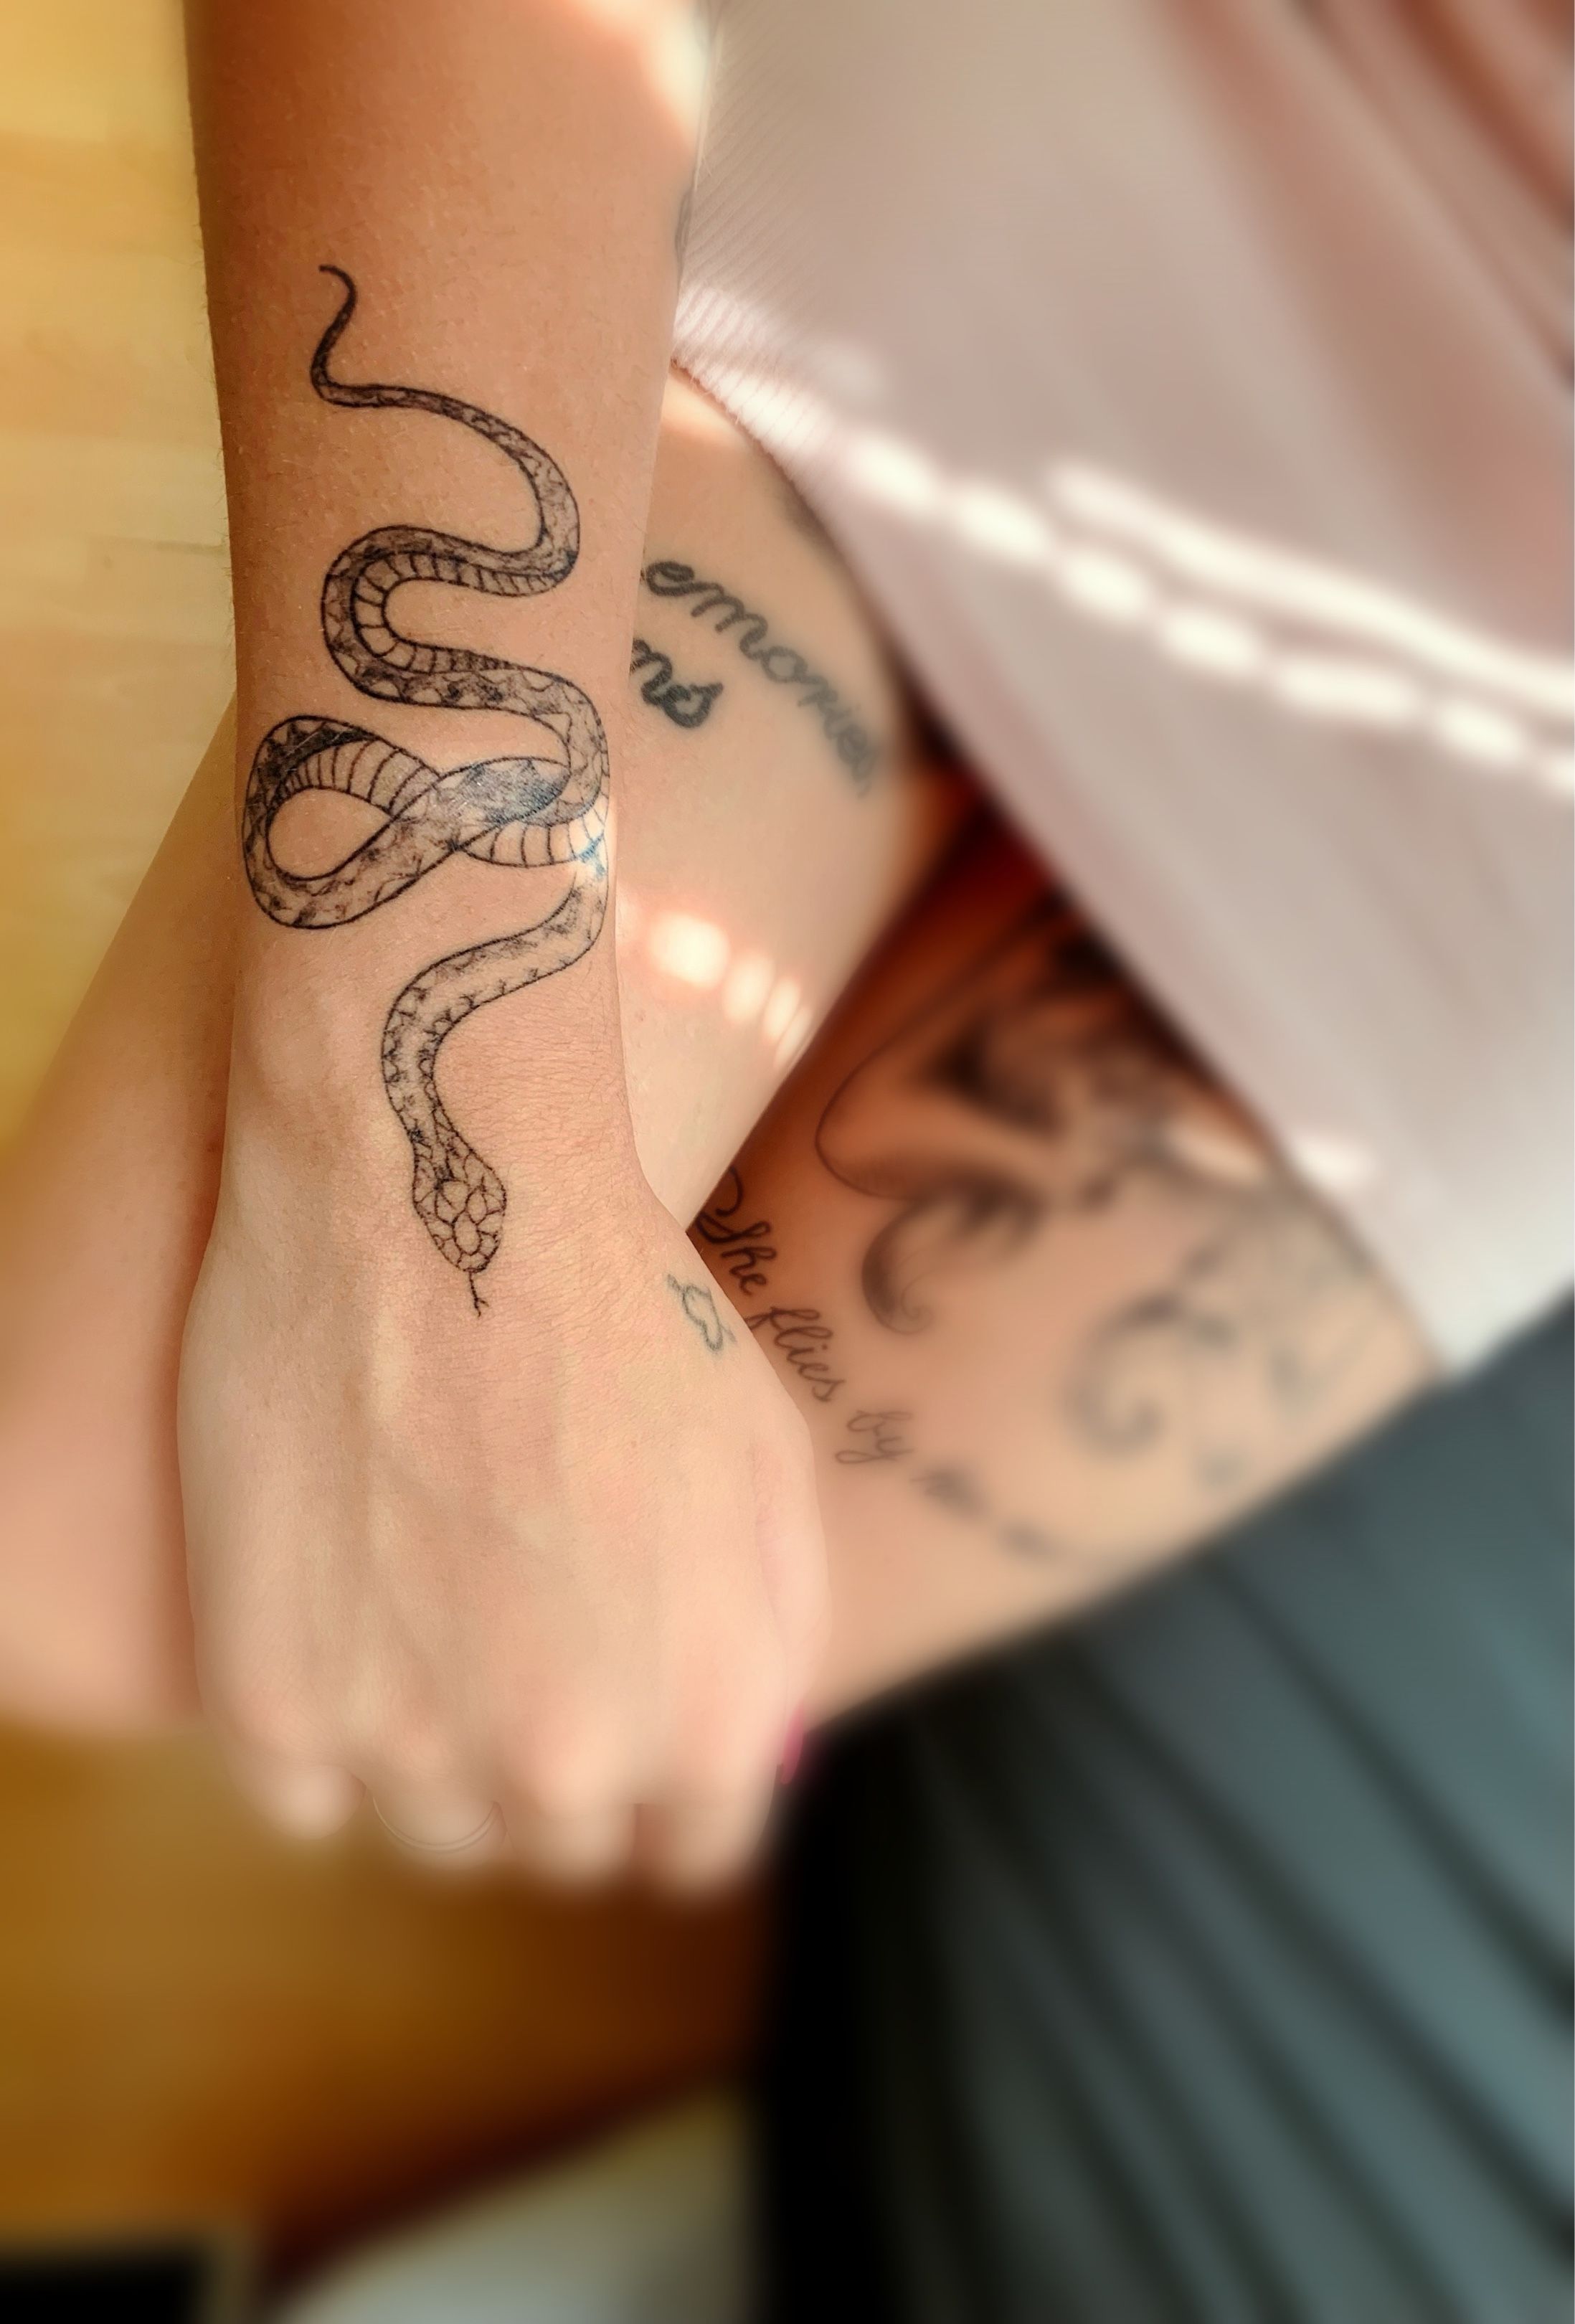 Snake and moon tattoo placed on the wrist